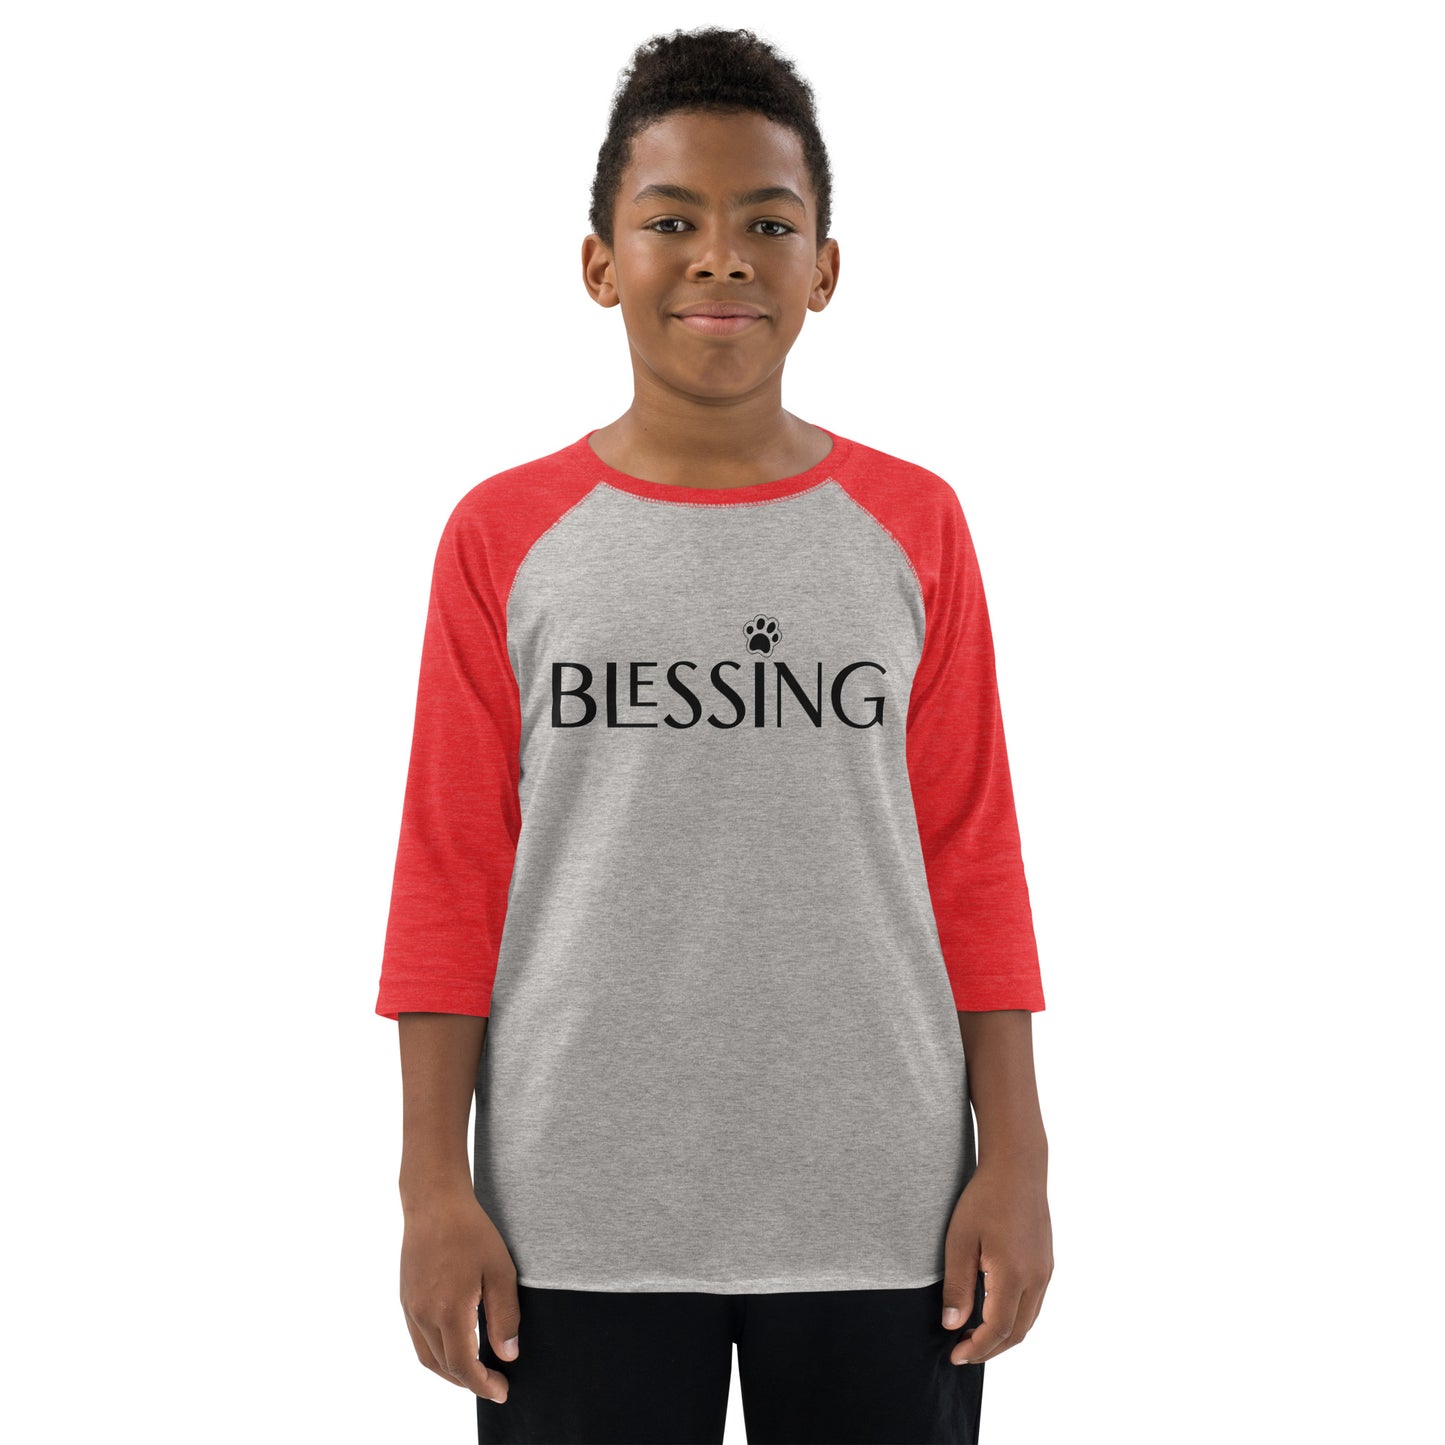 Blessing with Paw 3/4-Sleeve Youth Raglan Shirt